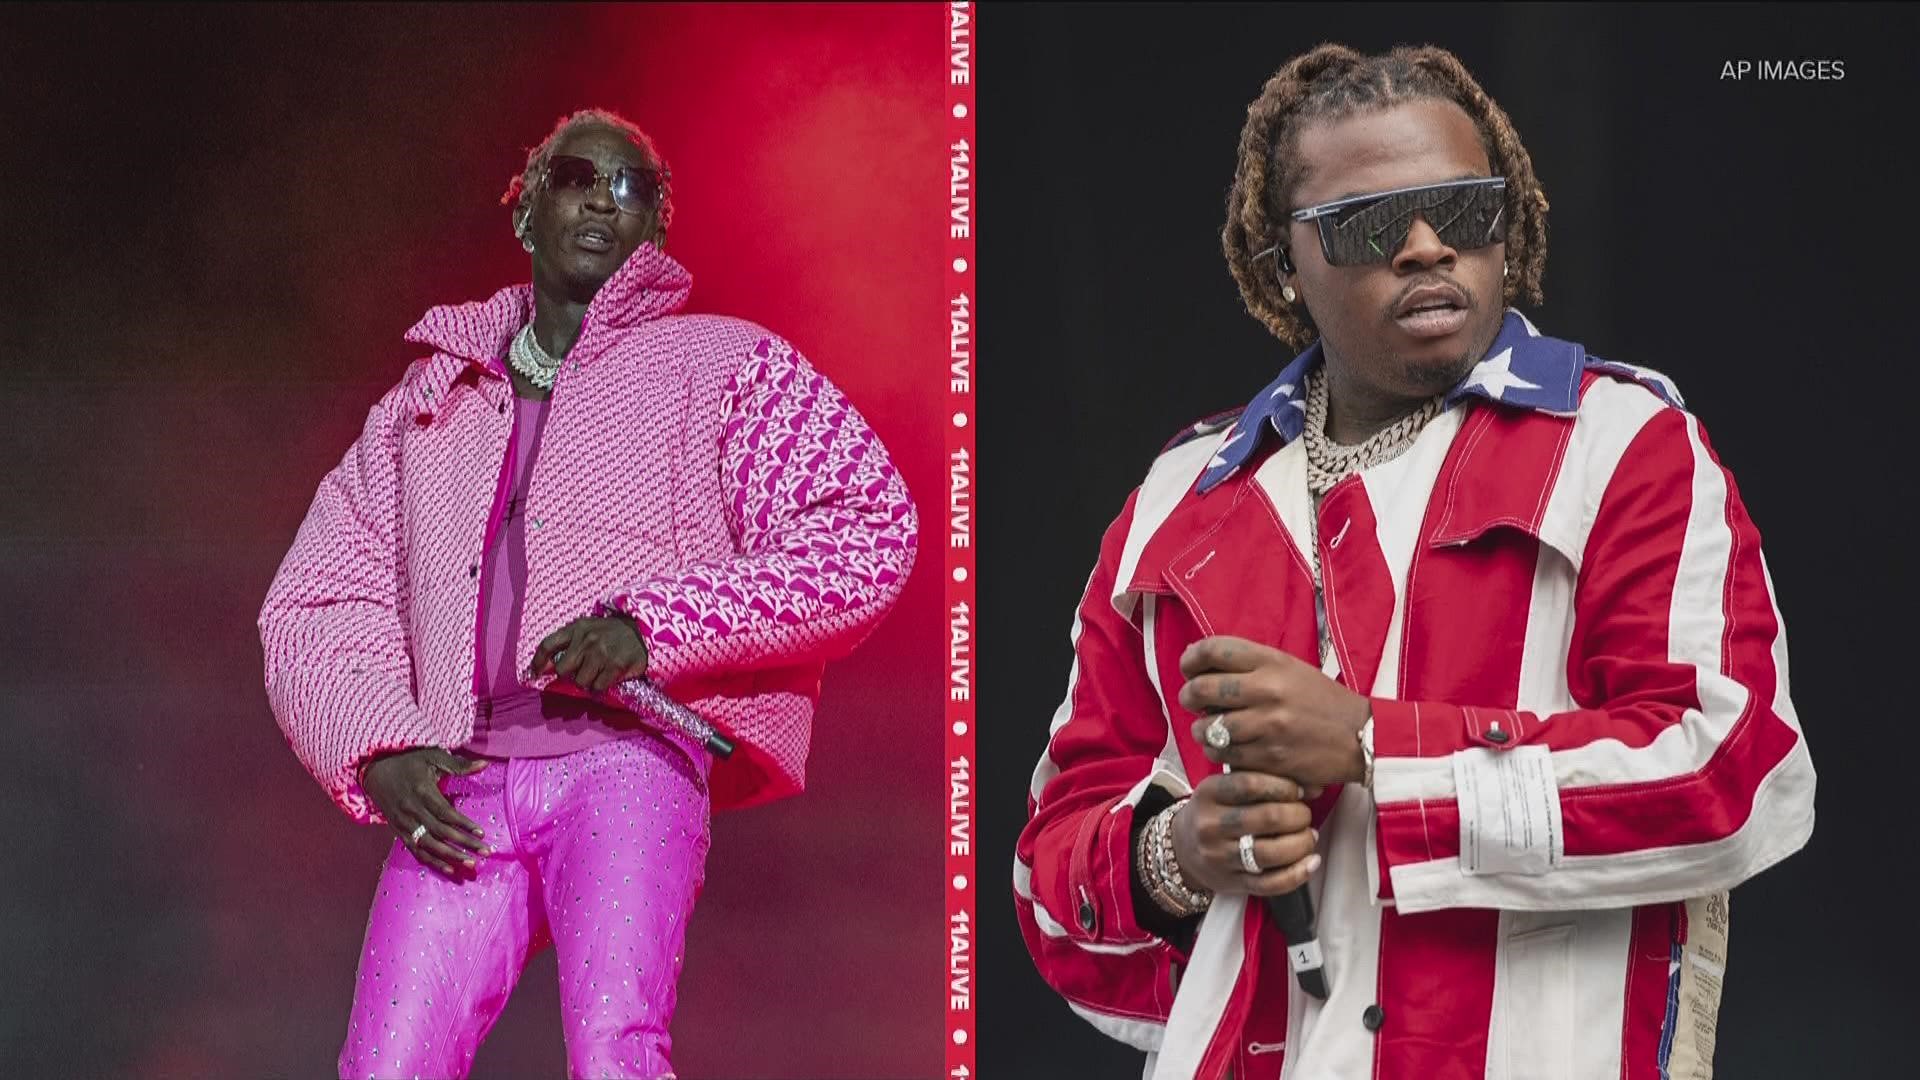 Young Thug's legal team is trying to throw out his rap lyrics as evidence in court, a new motion revealed.